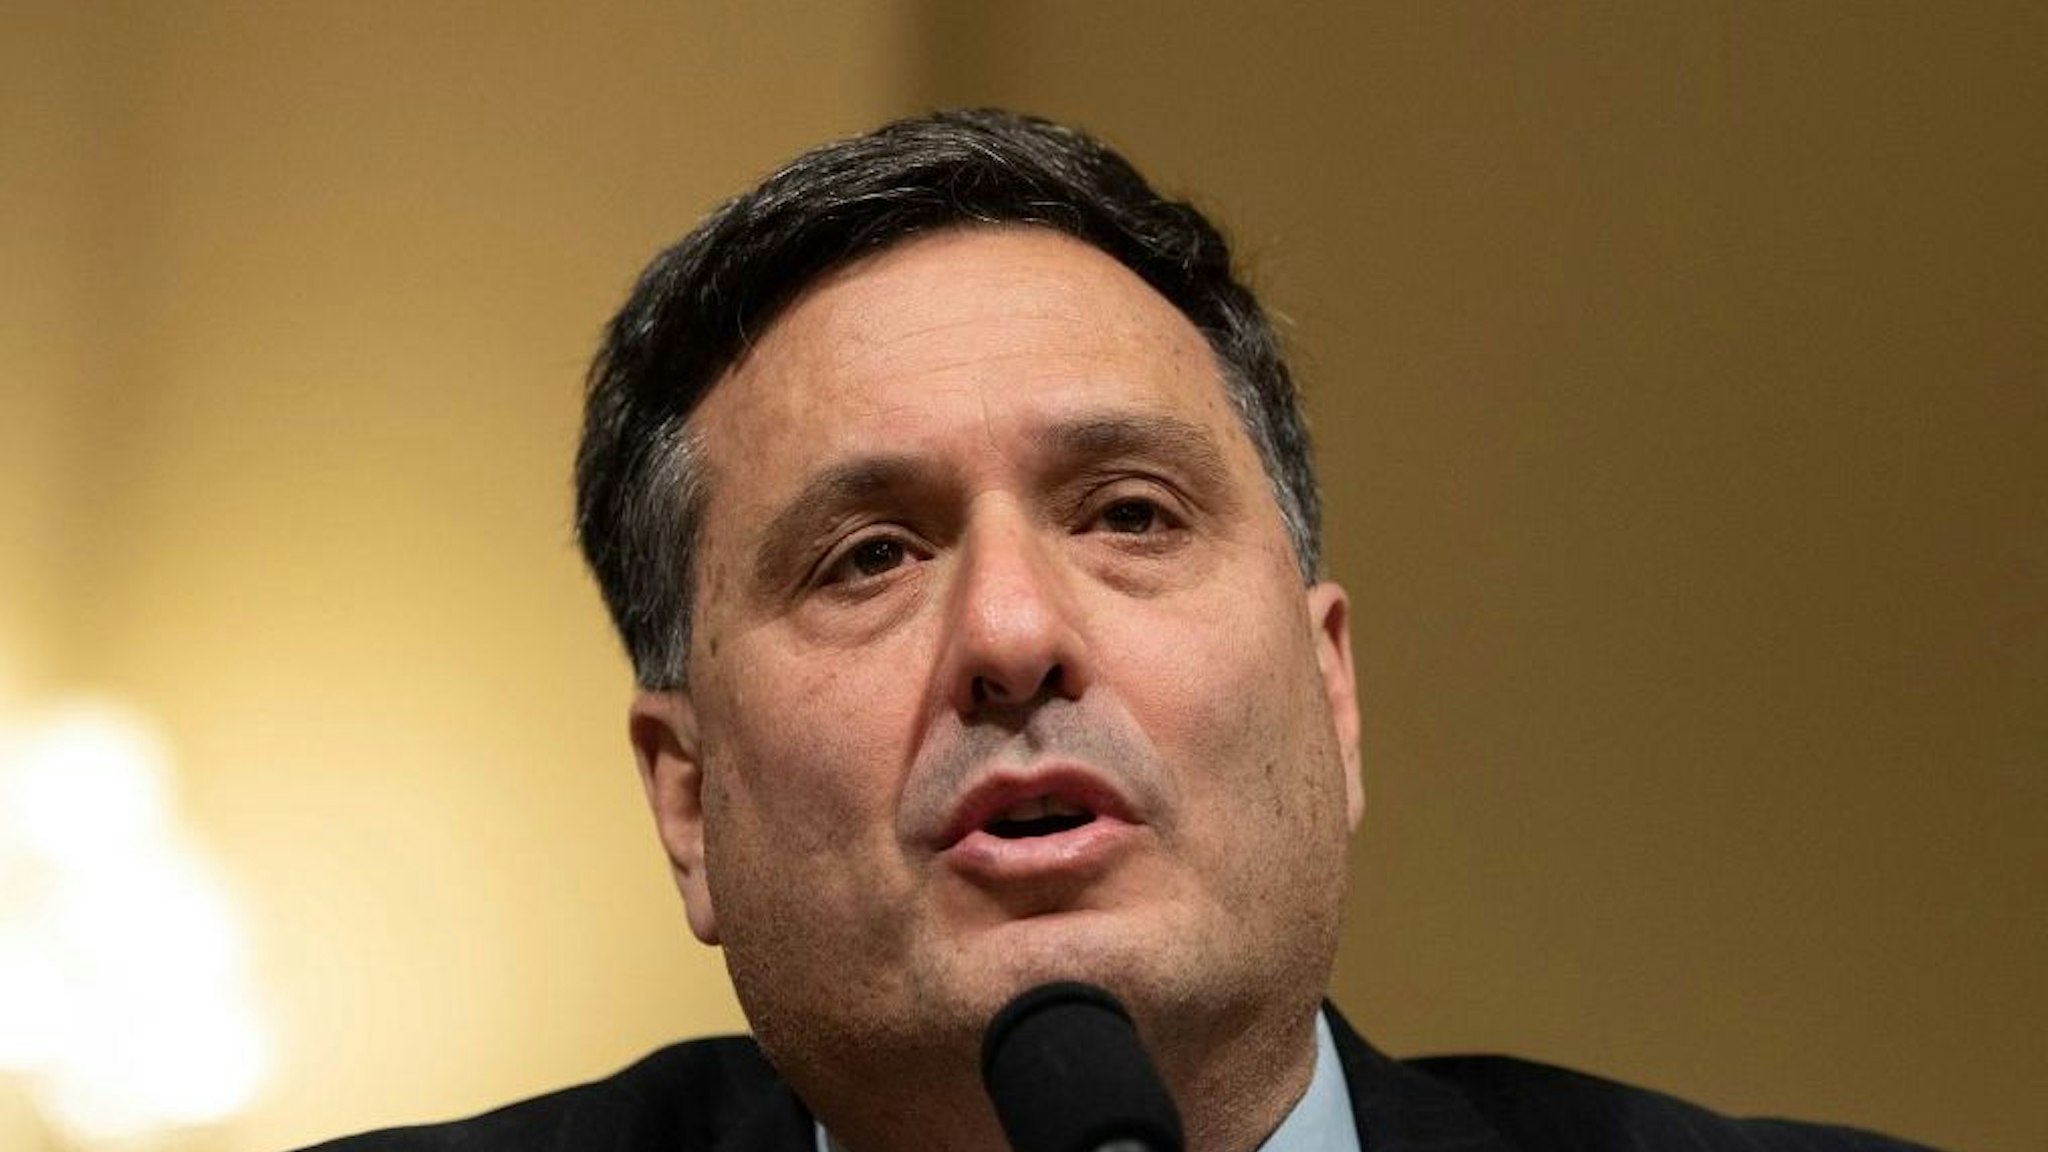 Ron Klain, former White House Ebola response coordinator, testifies before the Emergency Preparedness, Response and Recovery Subcommittee hearing on "Community Perspectives on Coronavirus Preparedness and Response" on Capitol Hill in Washington, DC, on March 10, 2020.